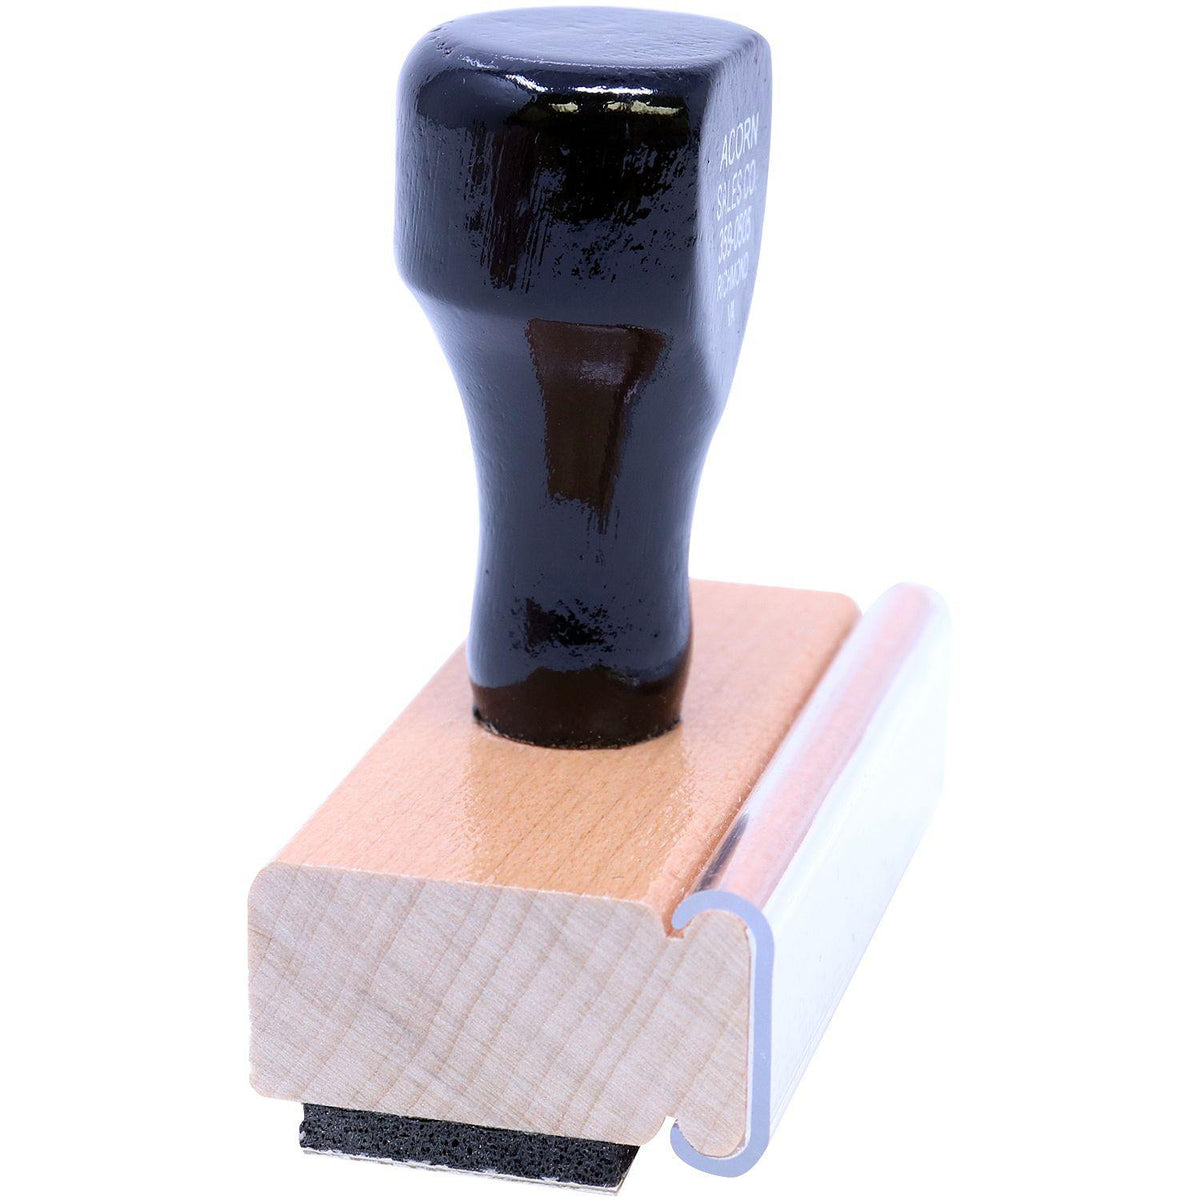 Side View of Special Rubber Stamp at an Angle